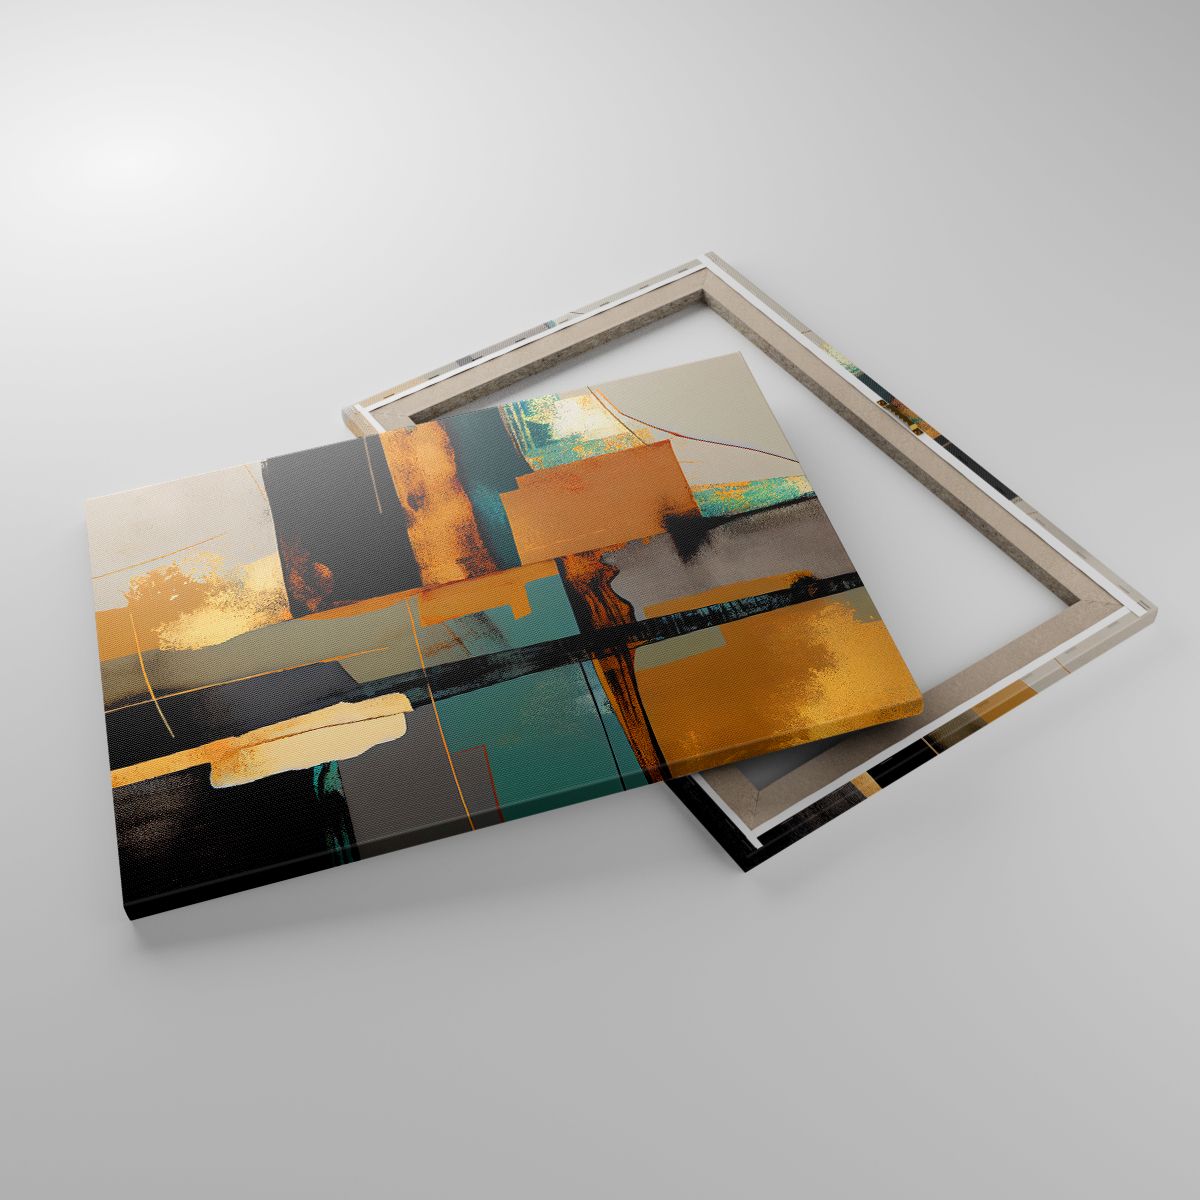 Canvas picture Abstraction, Canvas picture Modern, Canvas picture Piece